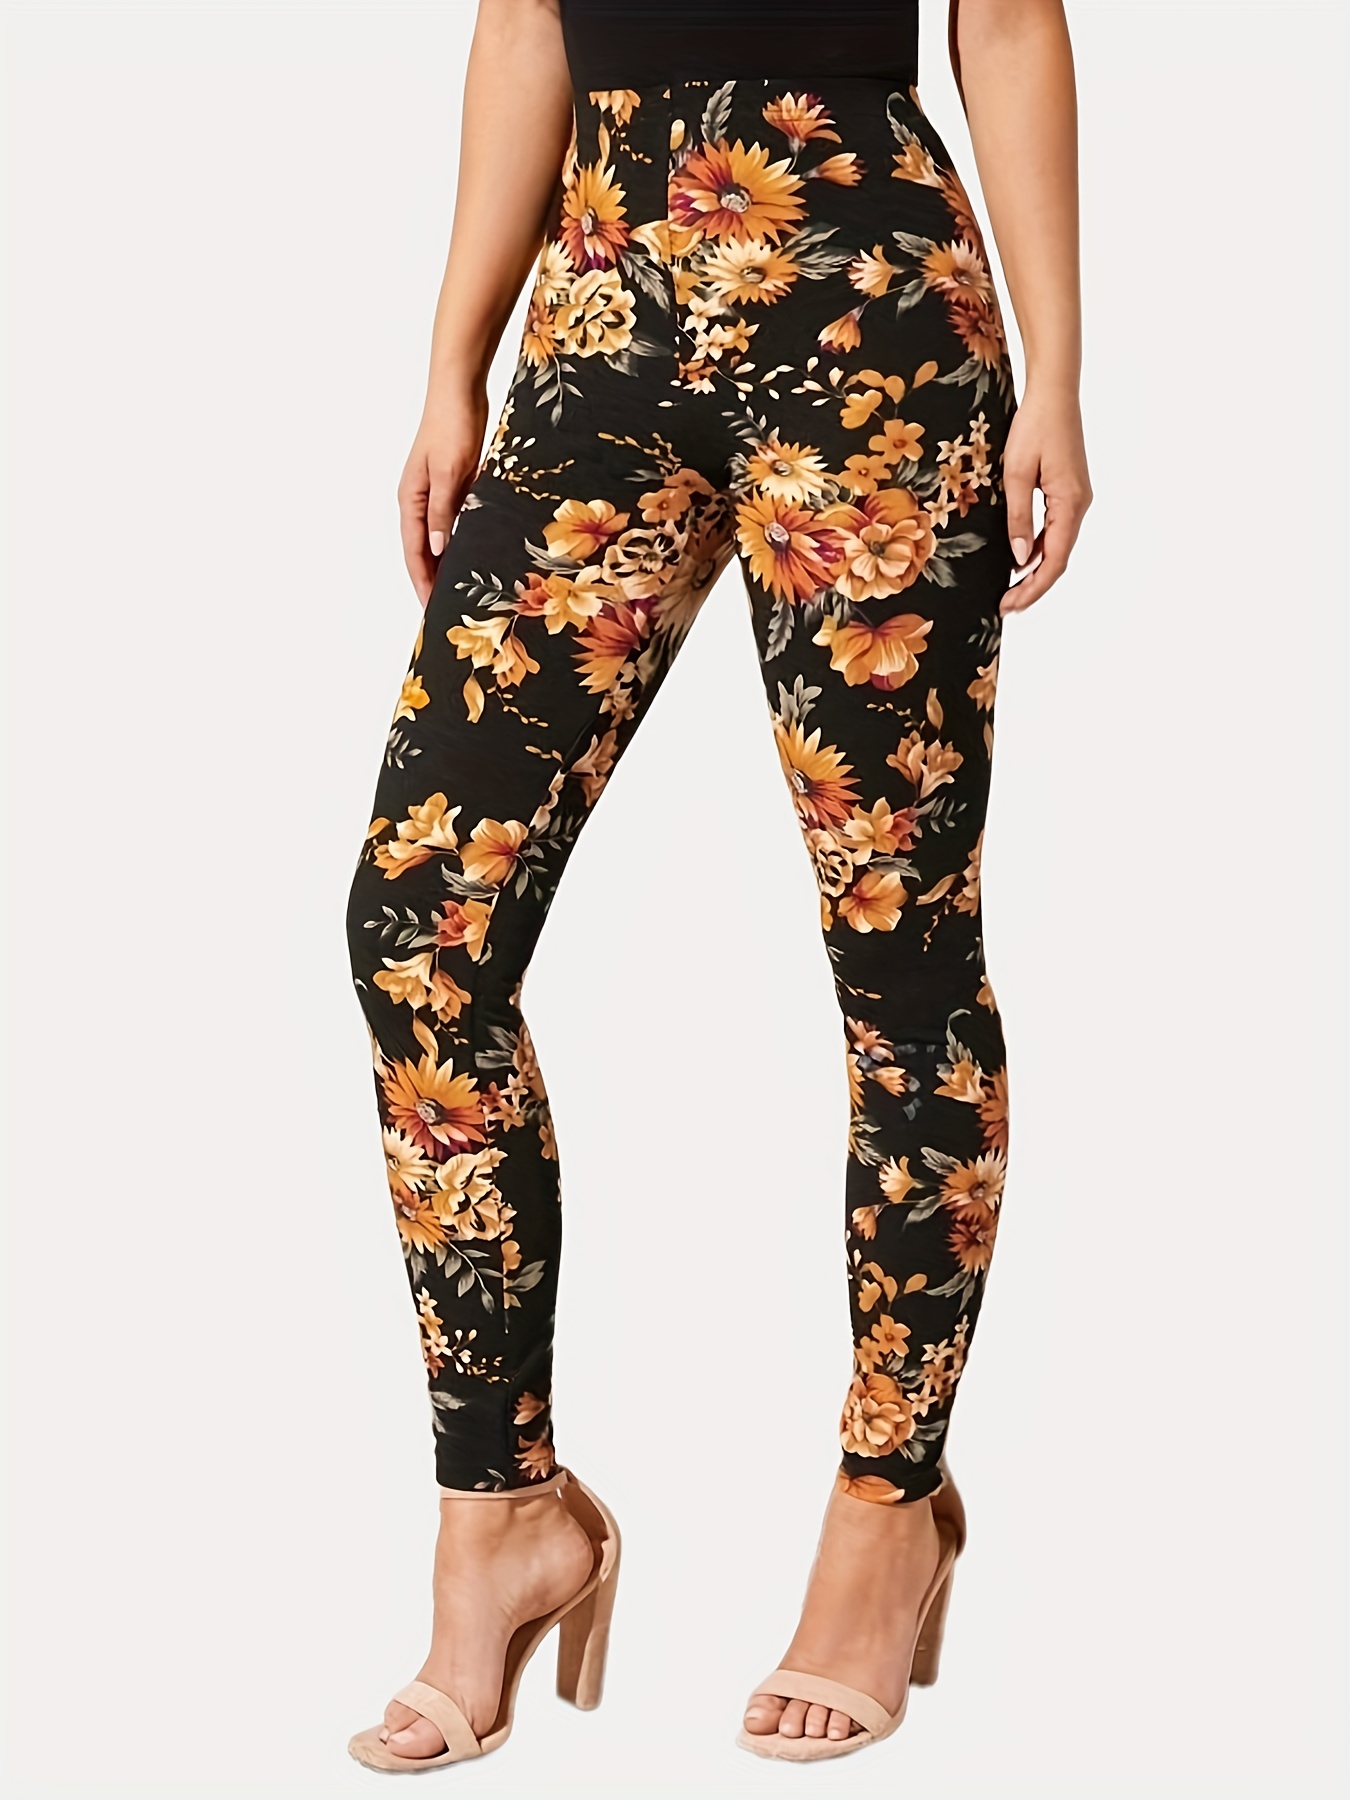 MAWCLOS Women Floral Print Leggings Casual Holiday Trousers Elastic Sexy  Vacation Bottom Pants 